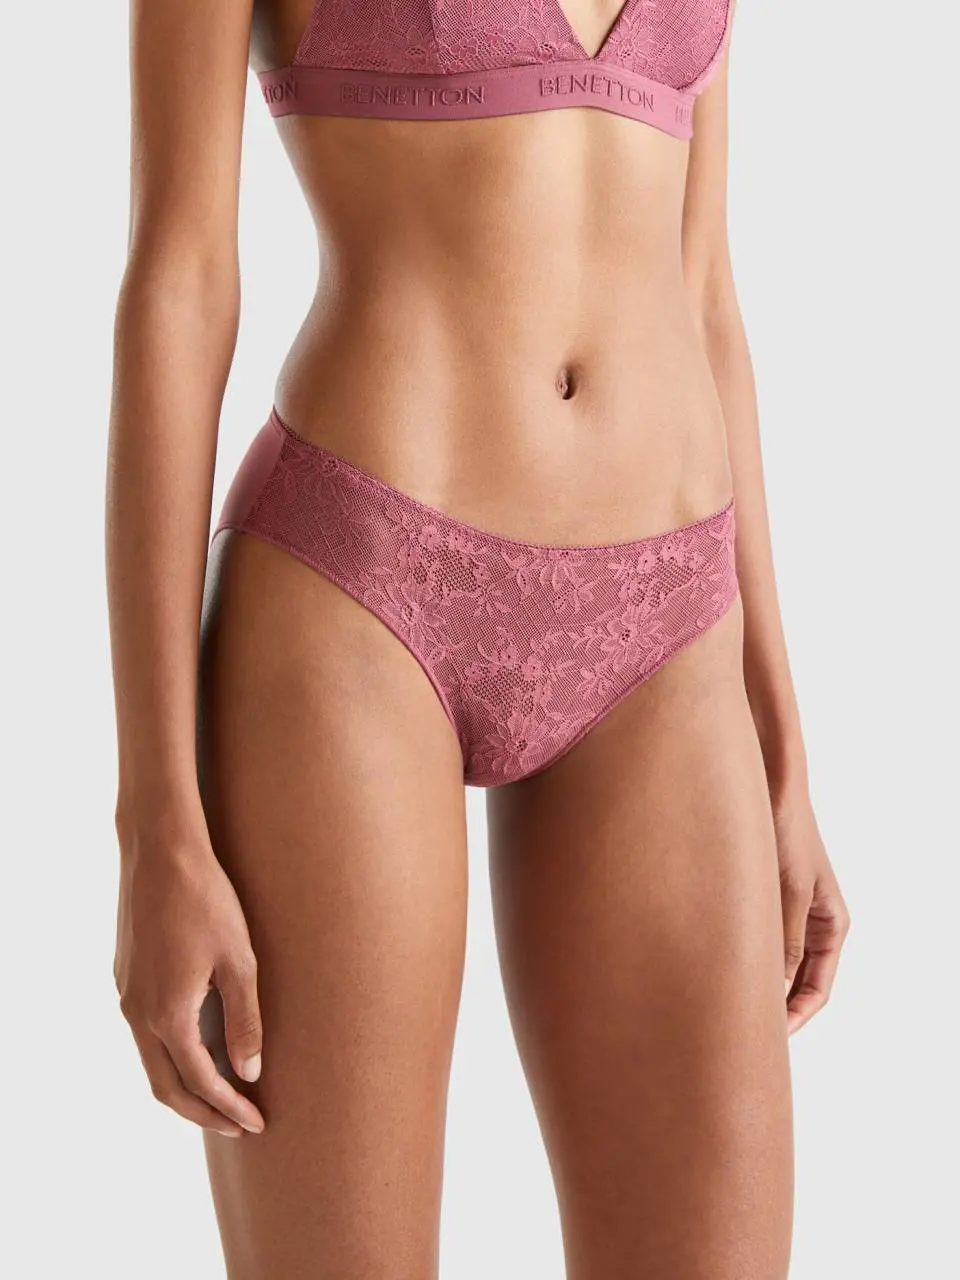 Benetton underwear in lace and microfiber. 1